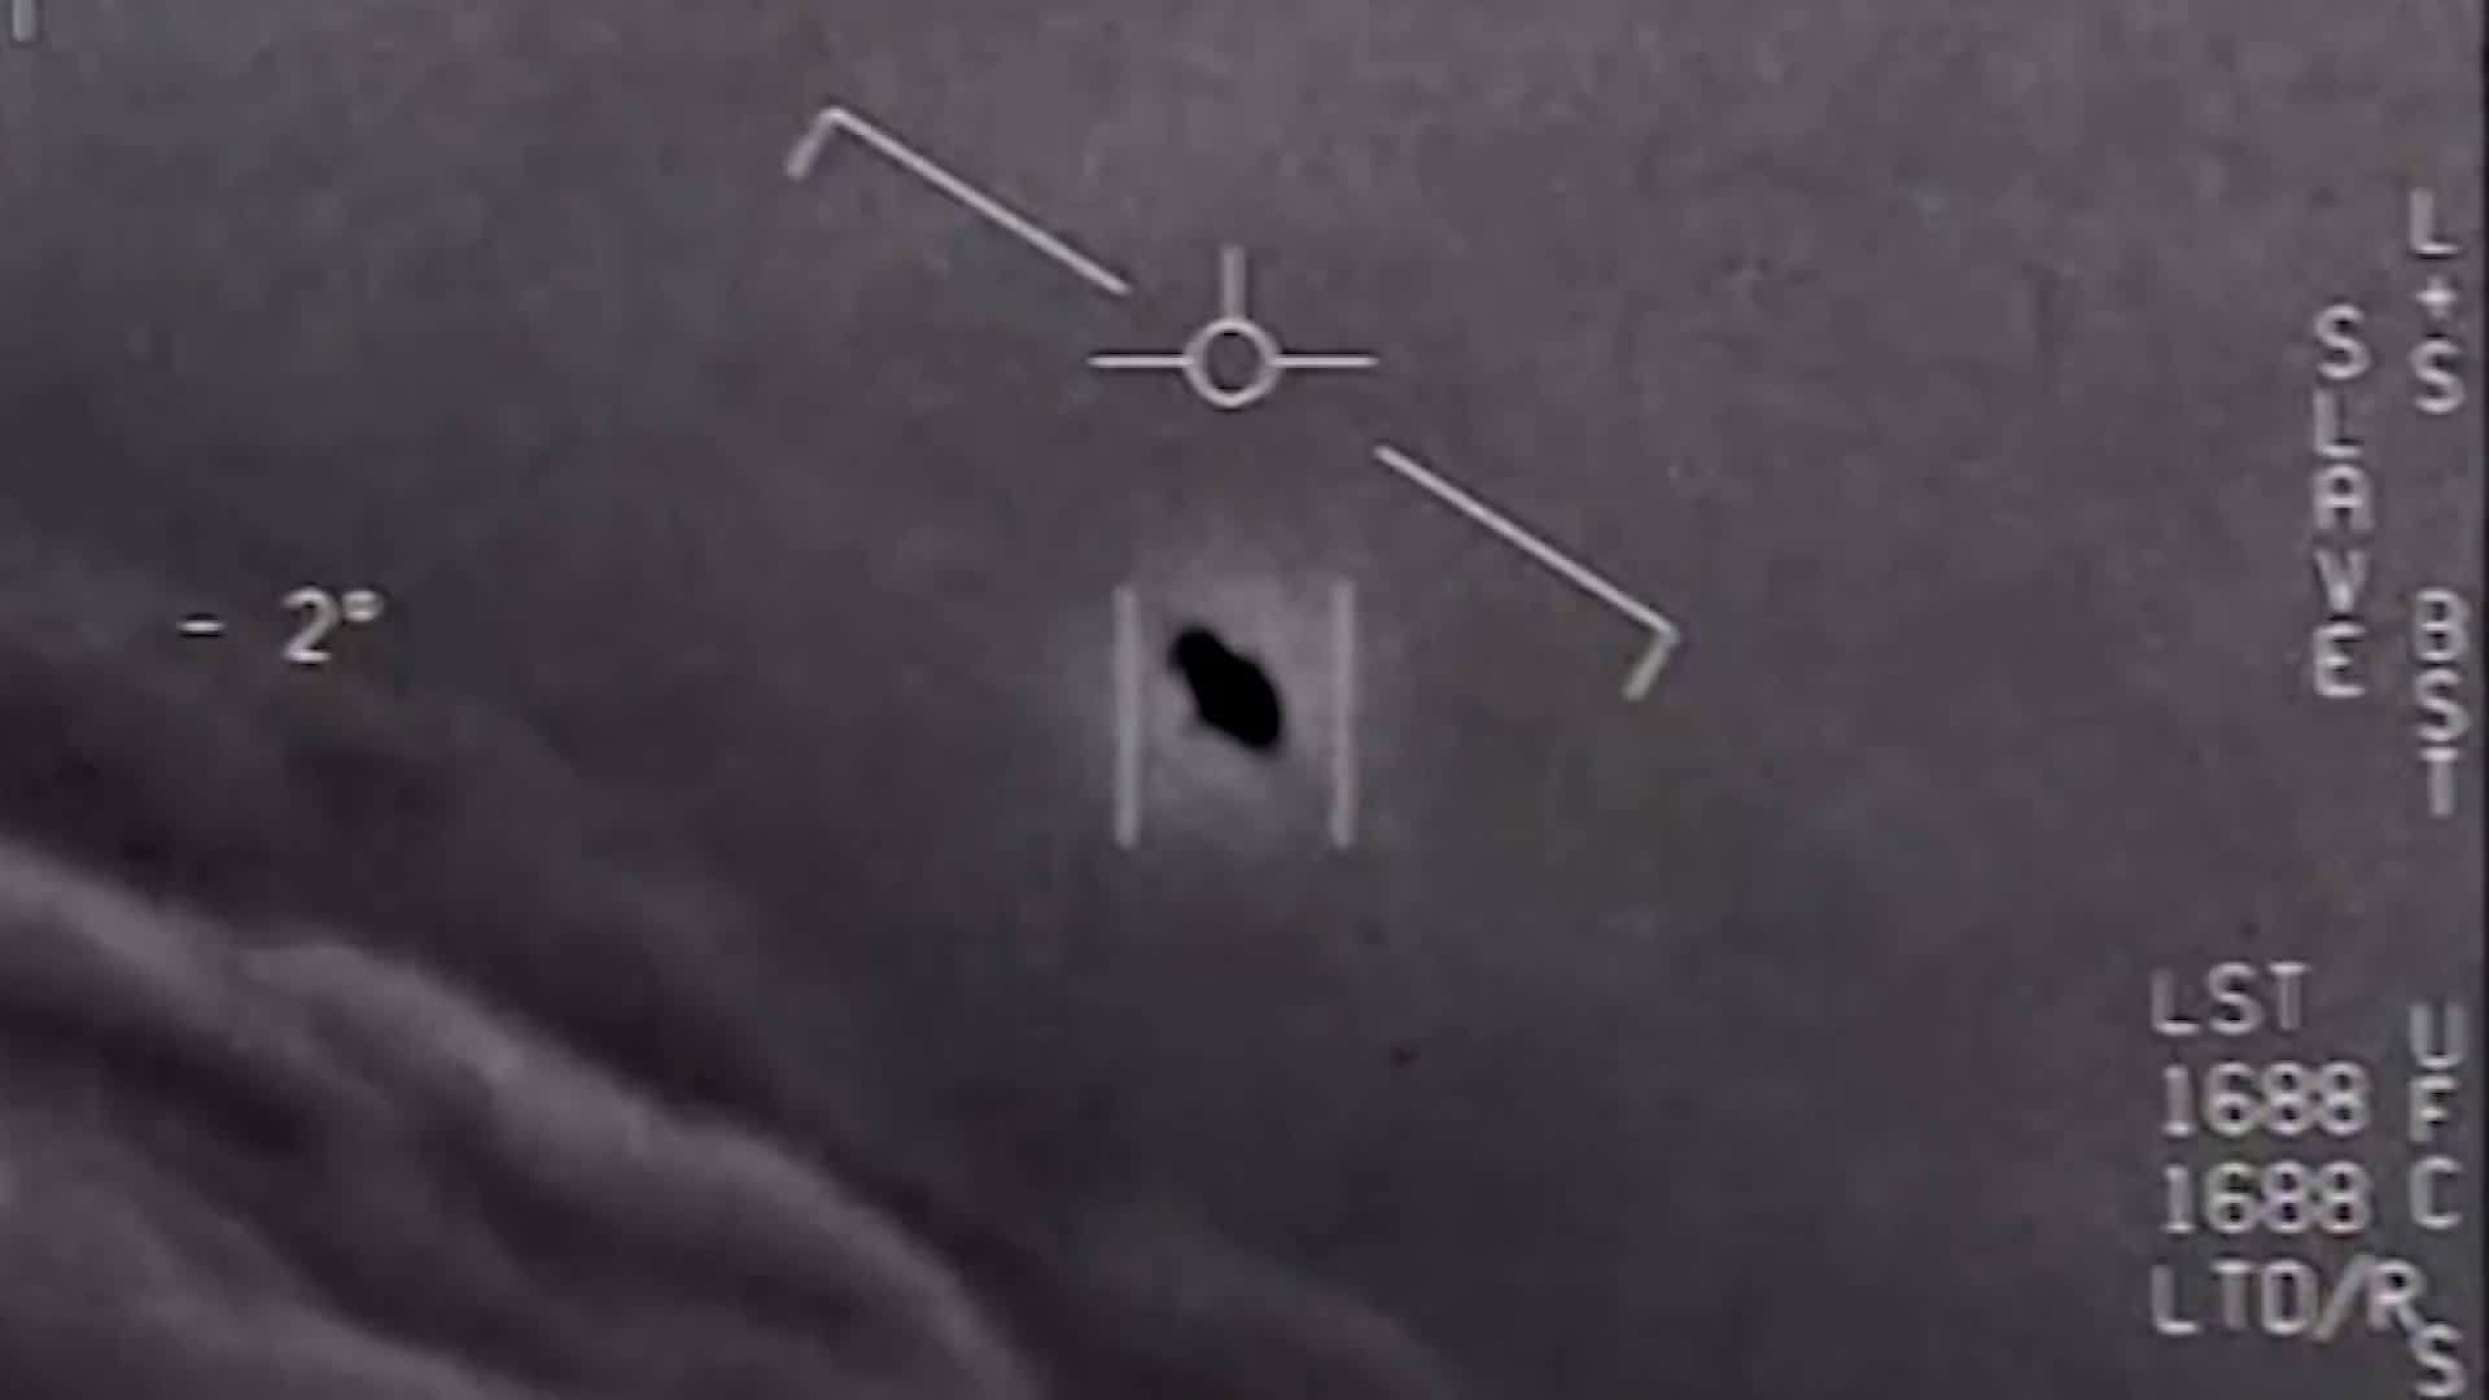 Why Alien Life on UFO's Don't Pass My 